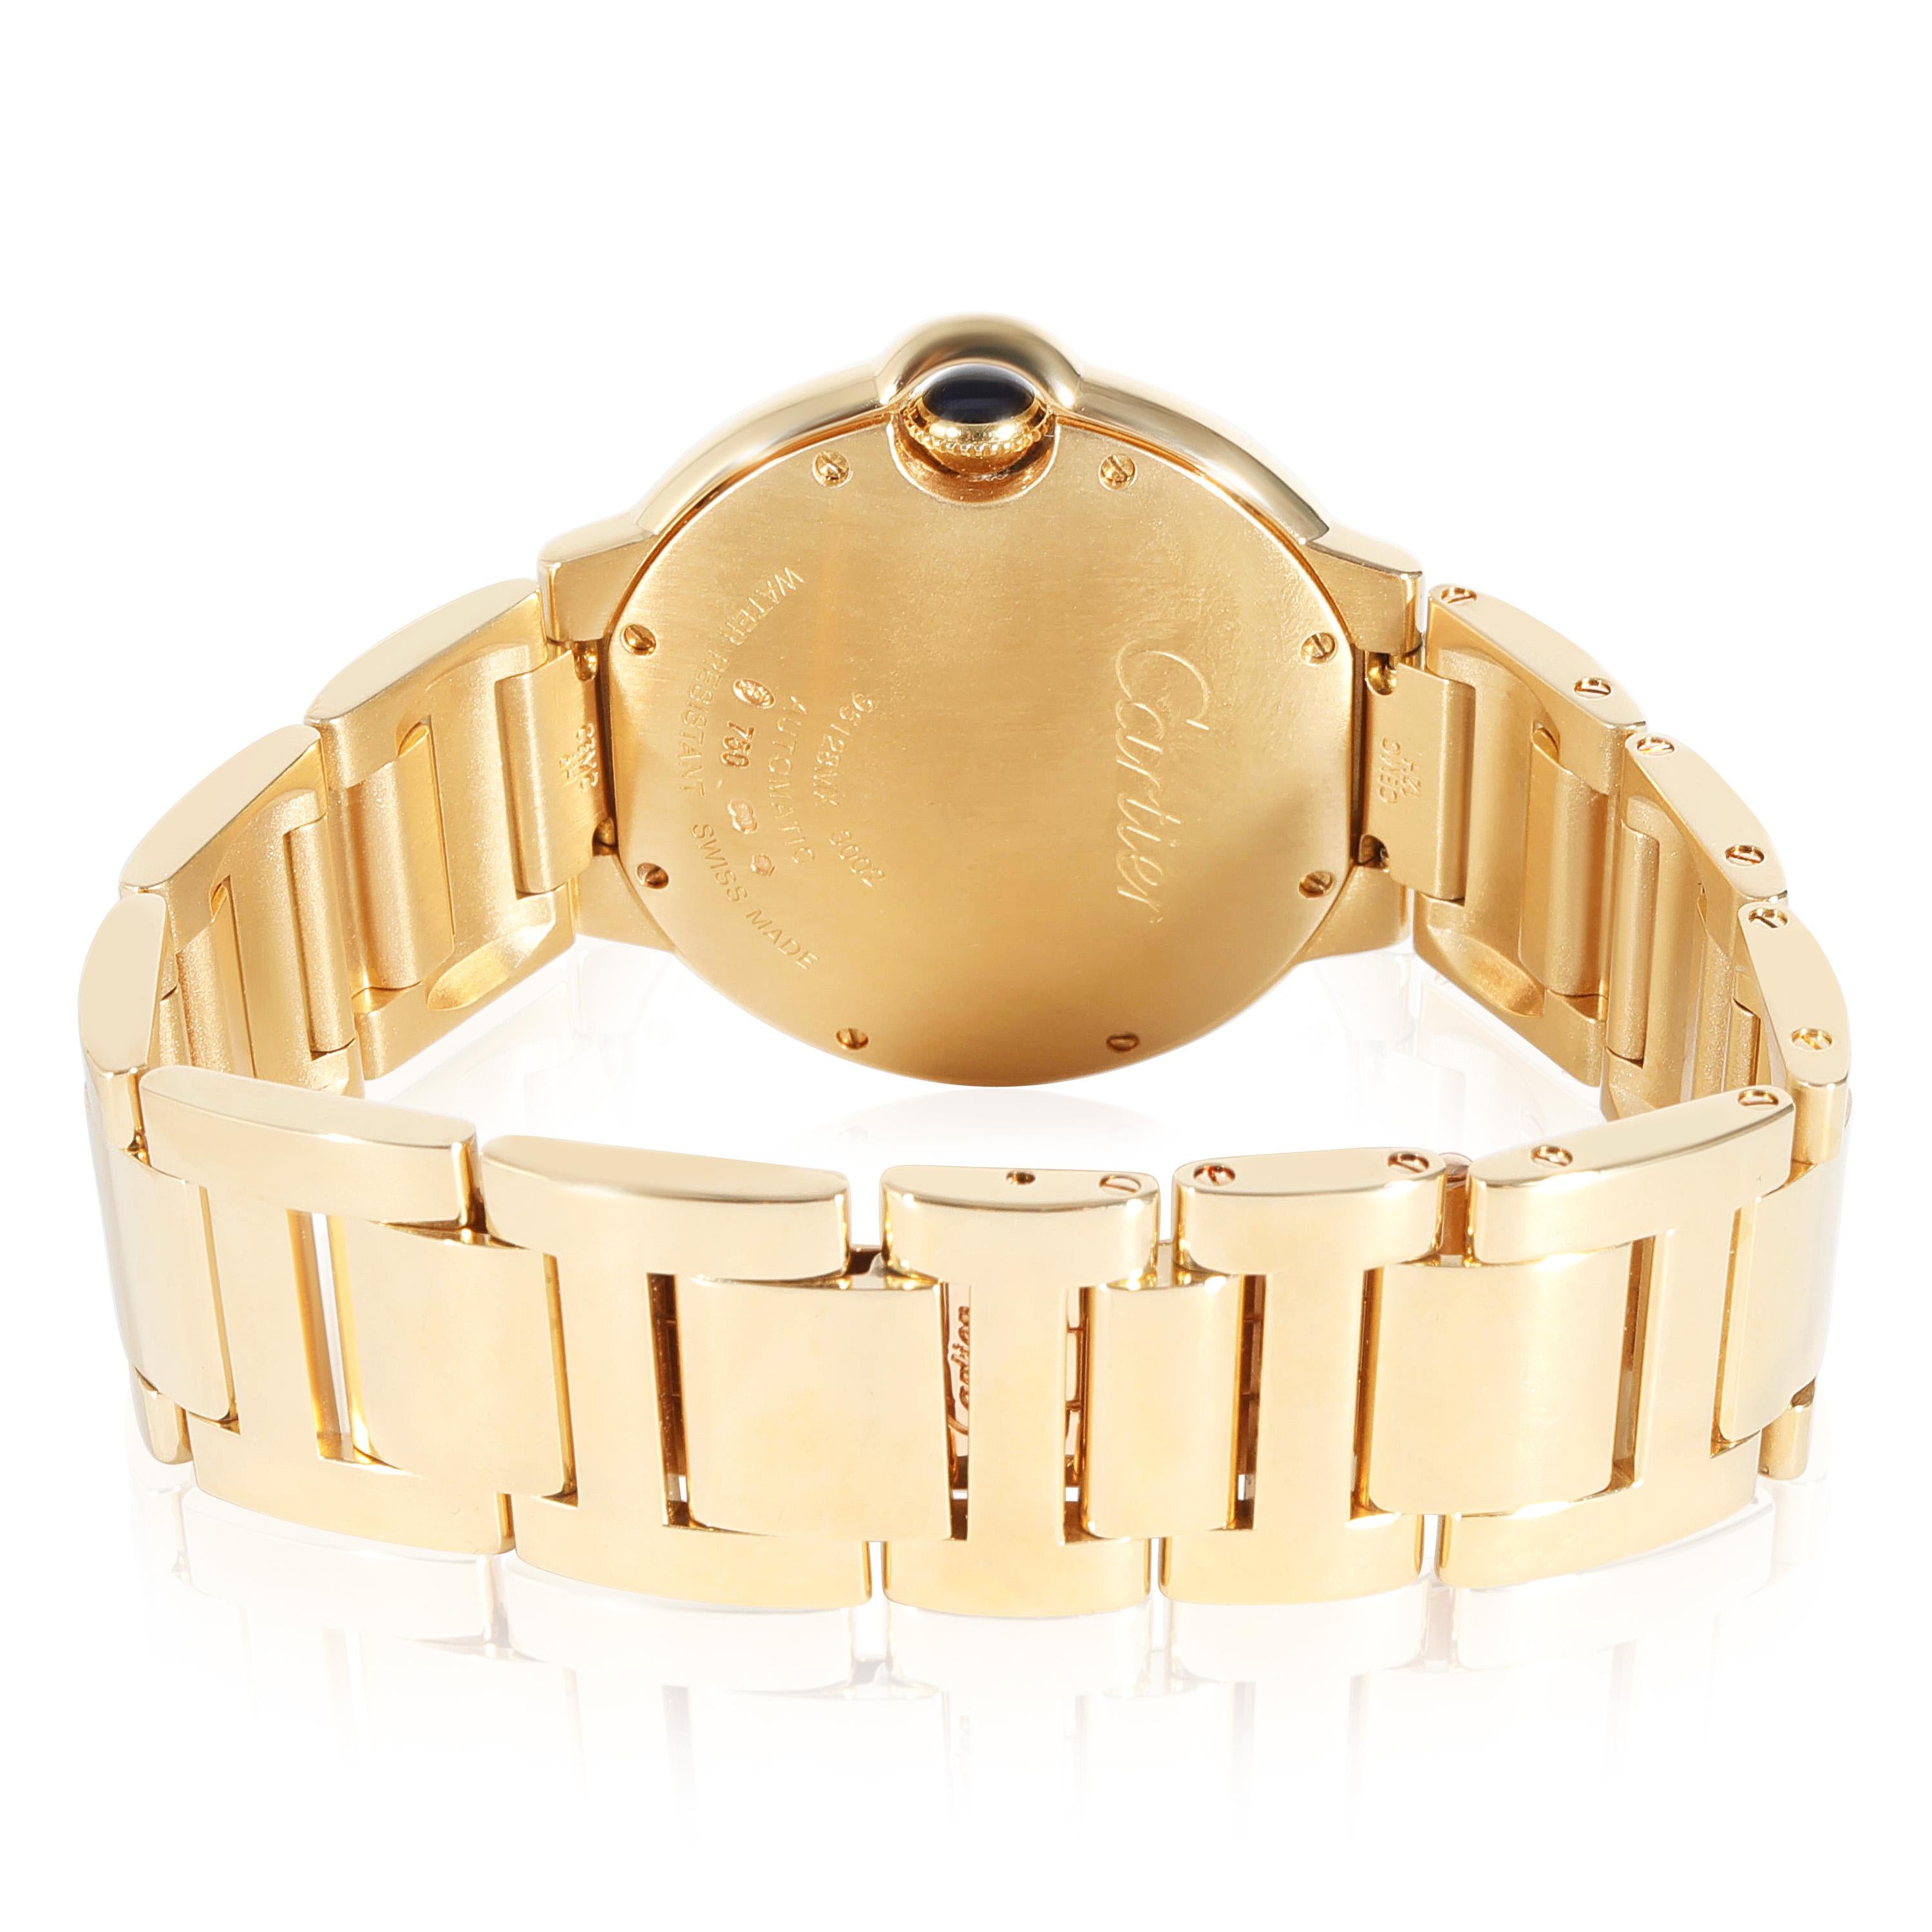 Cartier Ballon Bleu de Cartier W69003Z2 Unisex Watch in 18kt Yellow Gold In Excellent Condition For Sale In New York, NY